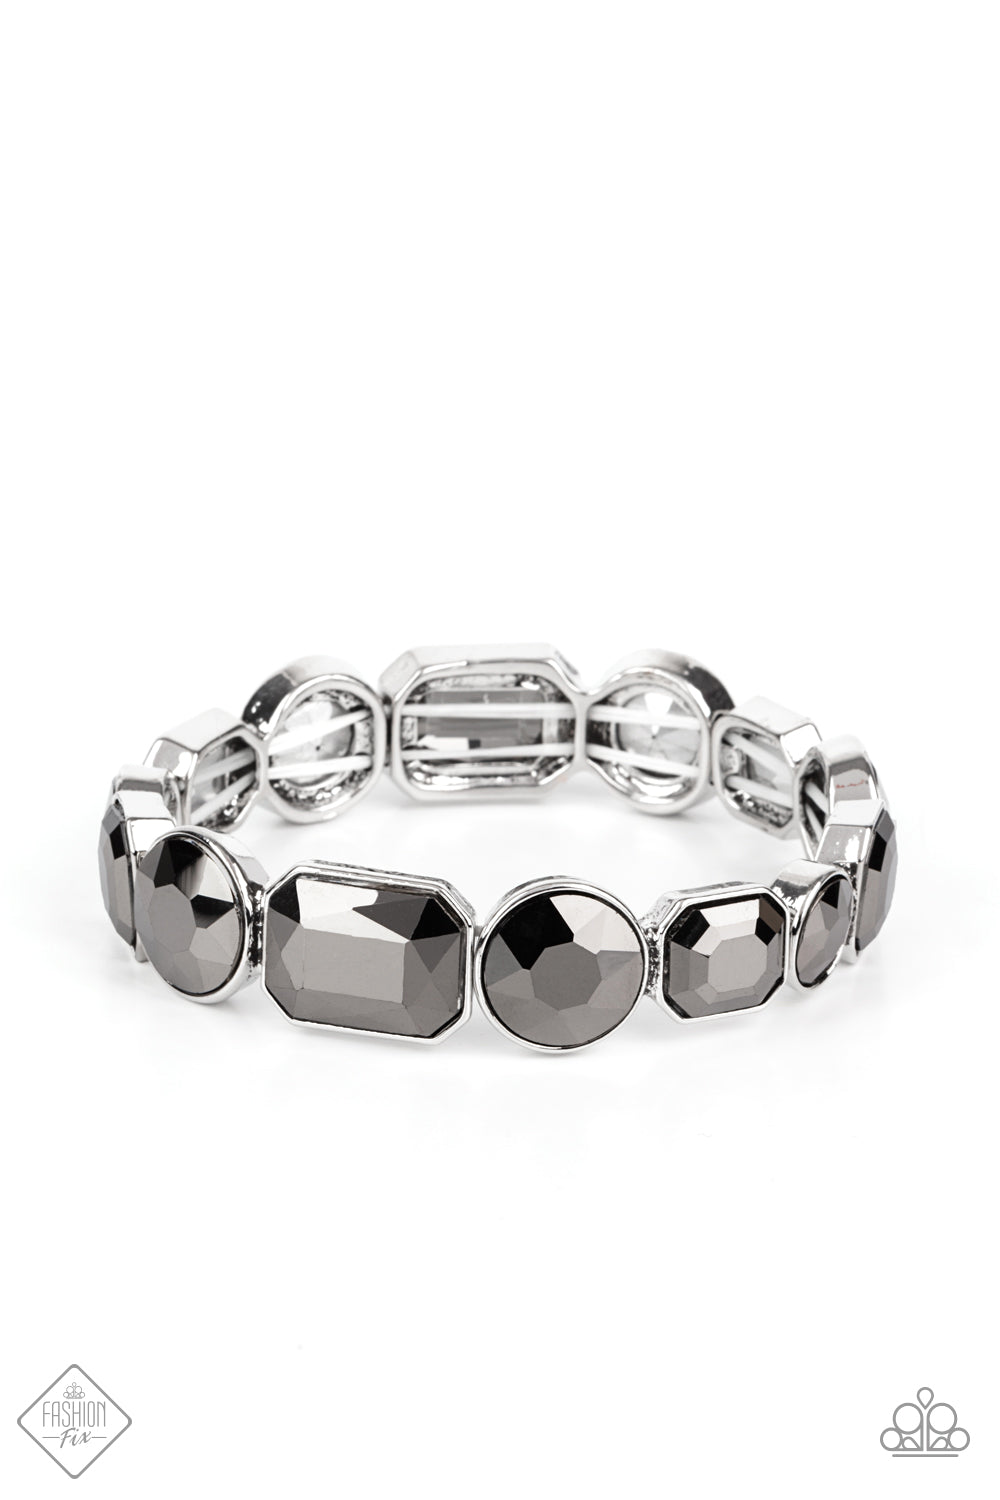 Paparazzi Extra Exposure Silver Stretch Bracelet - Fashion Fix Magnificent Musings March 2021